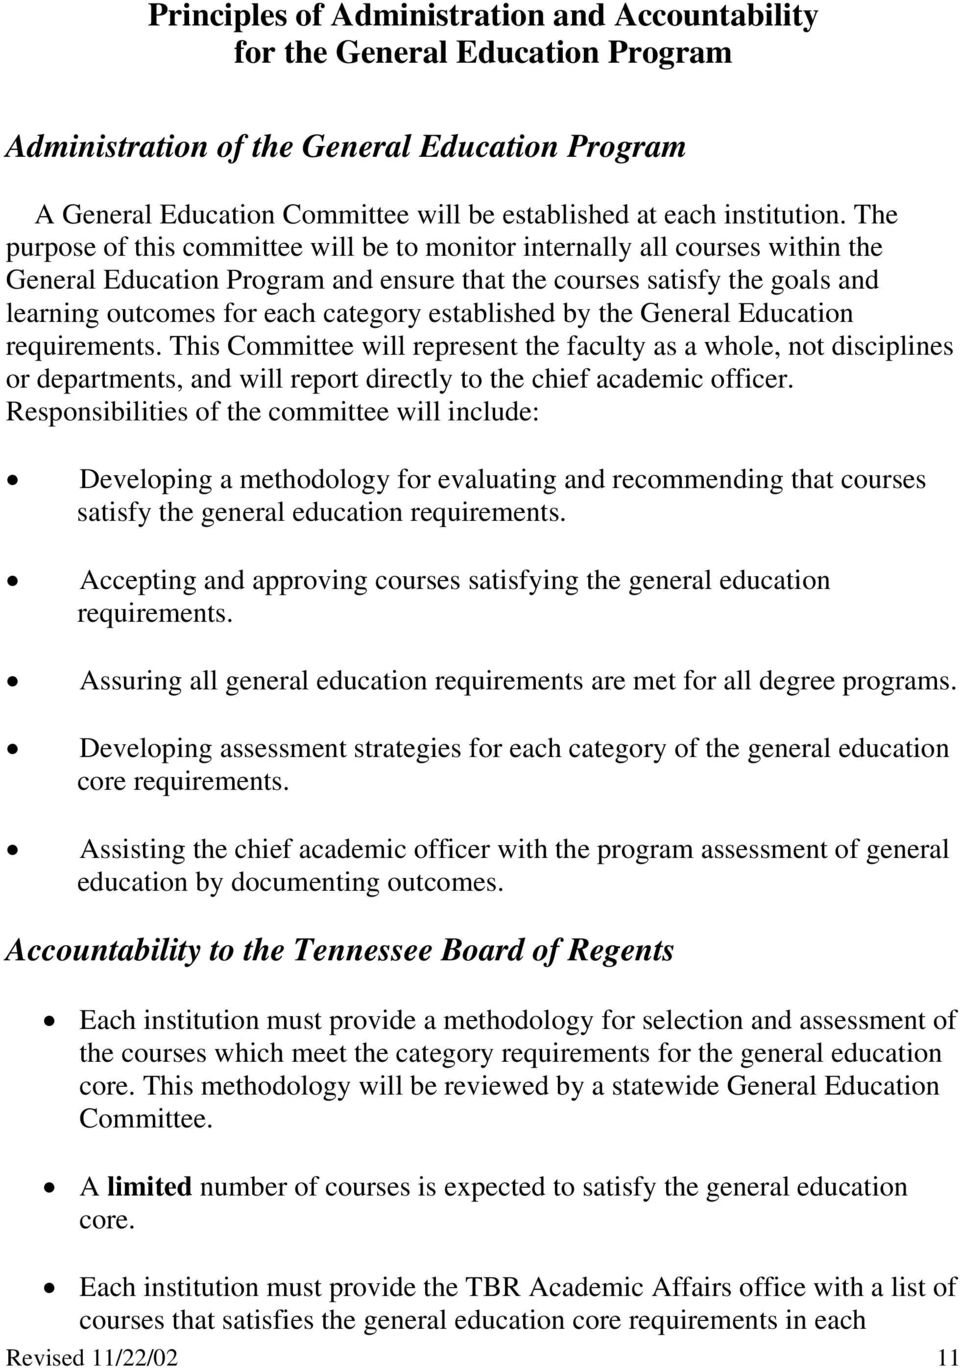 established by the General Education requirements. This Committee will represent the faculty as a whole, not disciplines or departments, and will report directly to the chief academic officer.